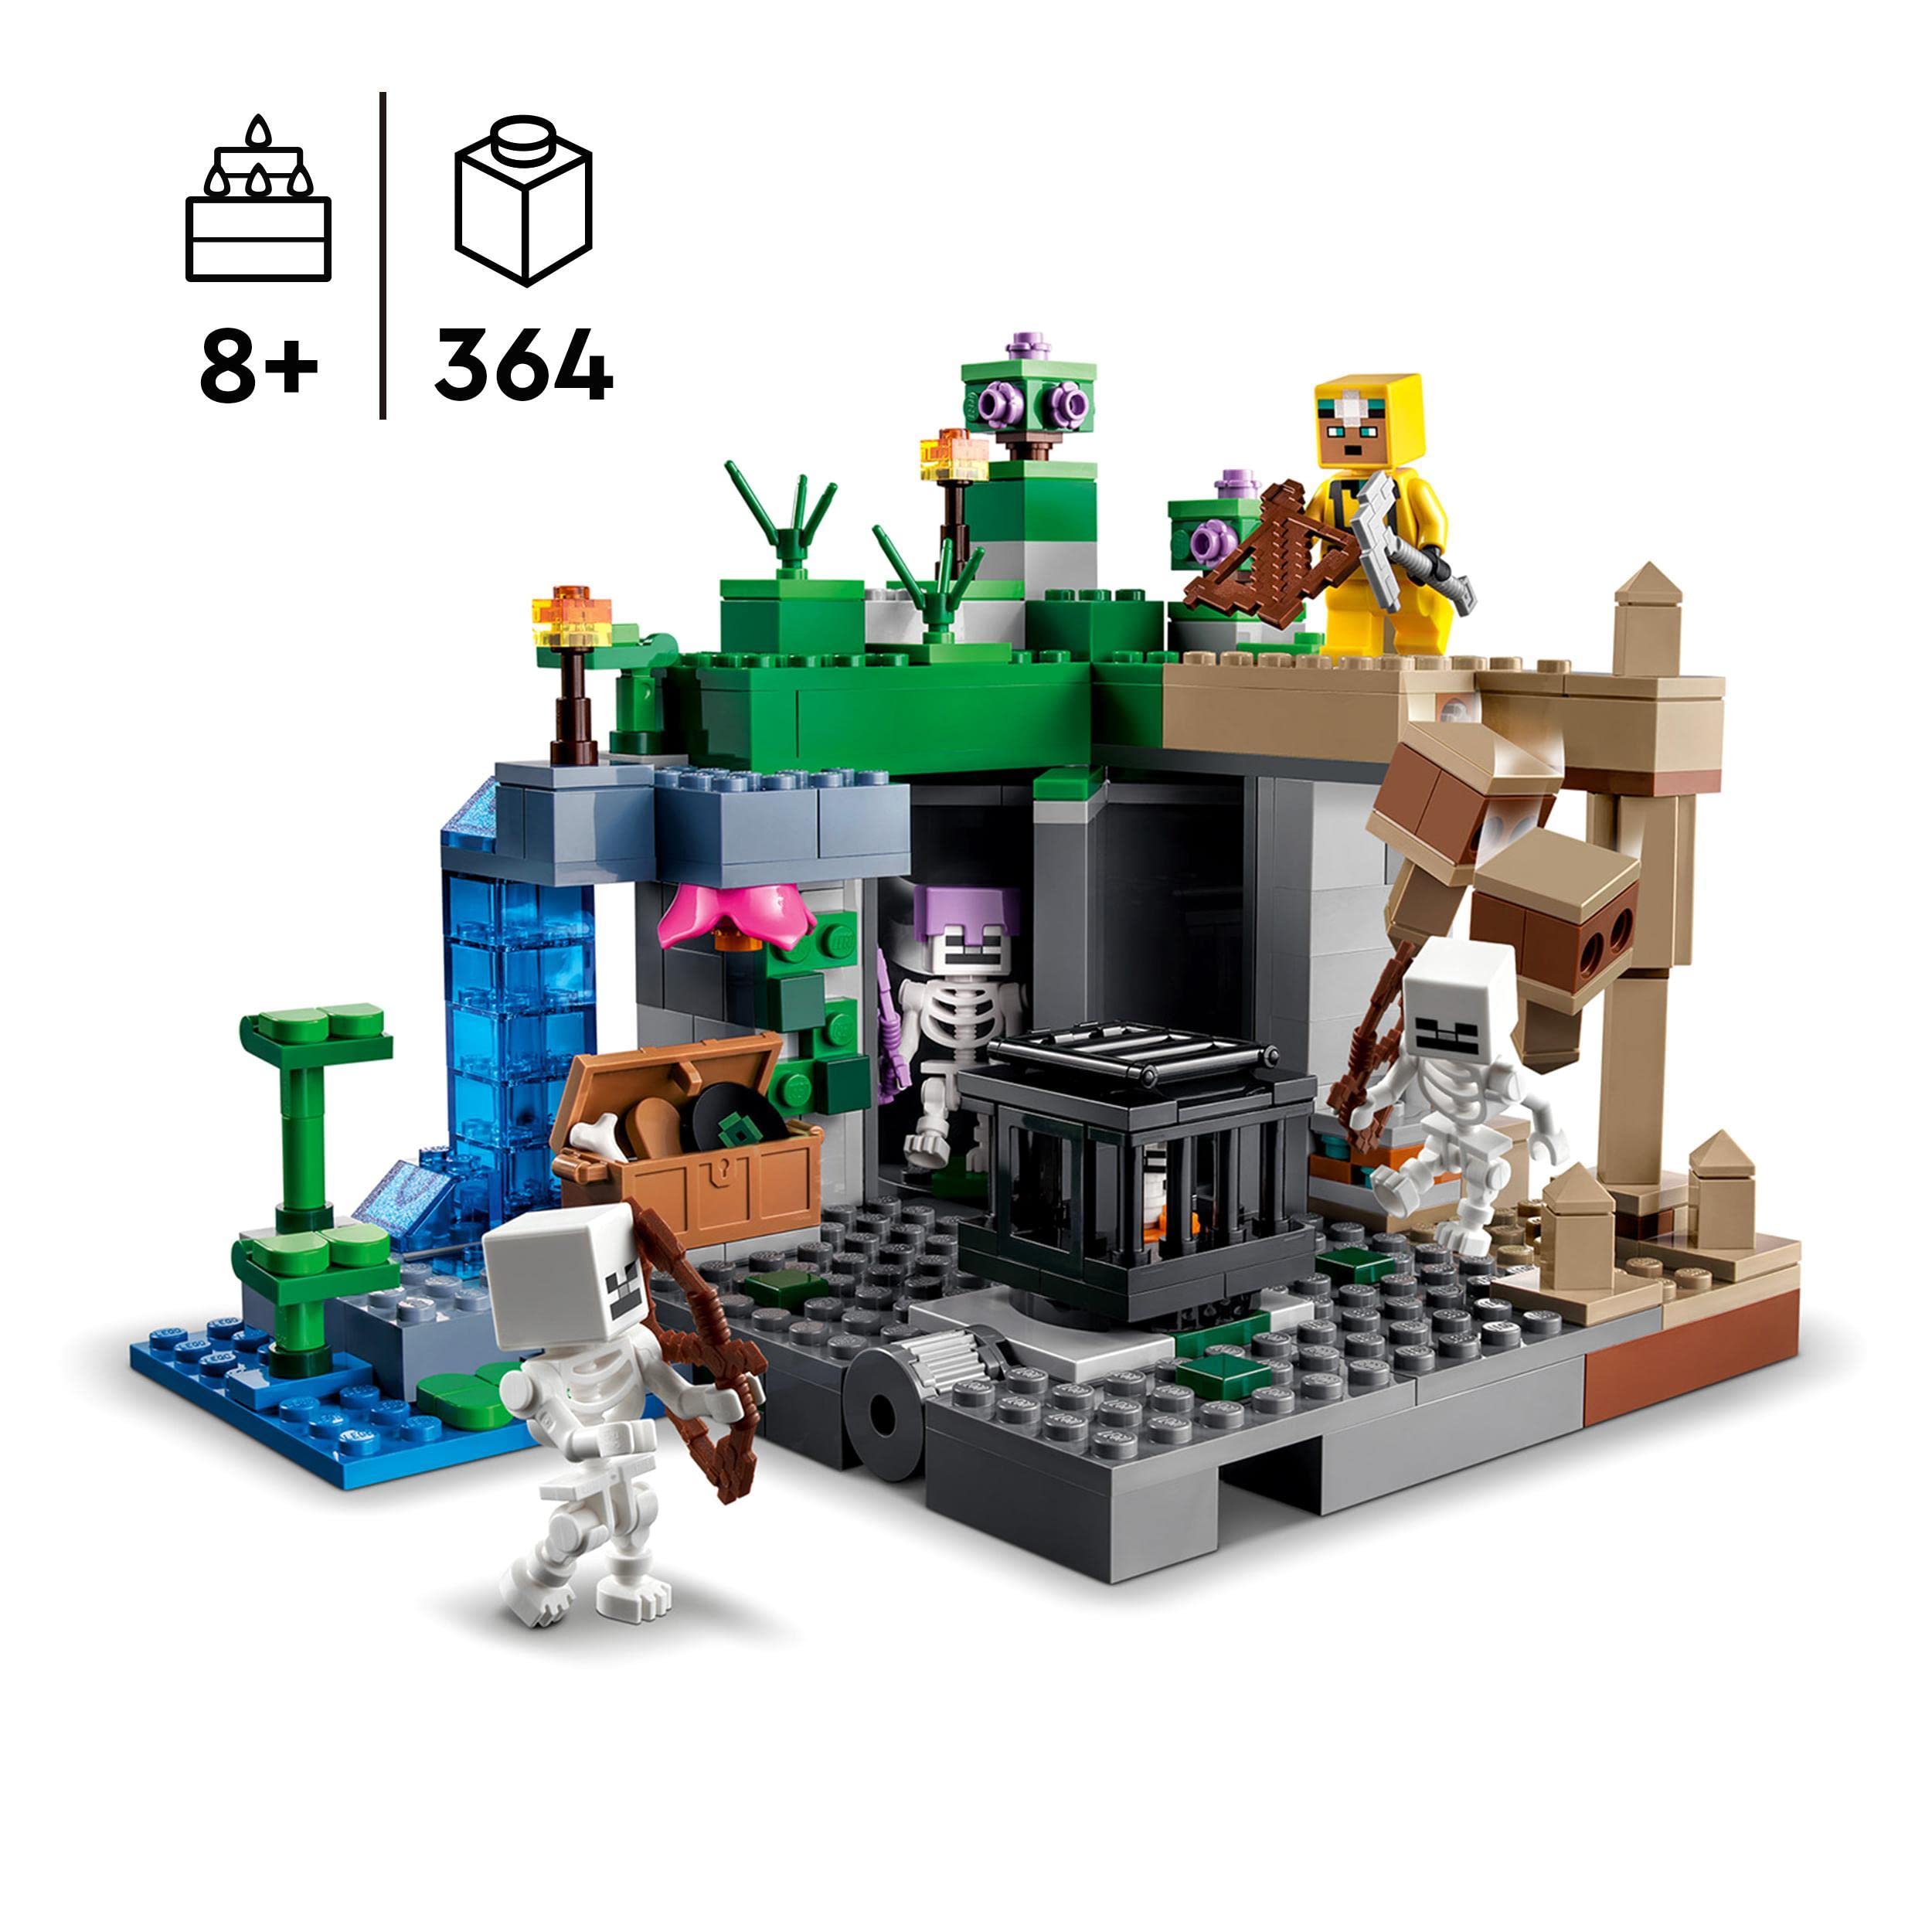 LEGO Minecraft The Skeleton Dungeon Set, Construction Toy for Kids with Caves, Mobs and Figures with Crossbow Accessories 21189